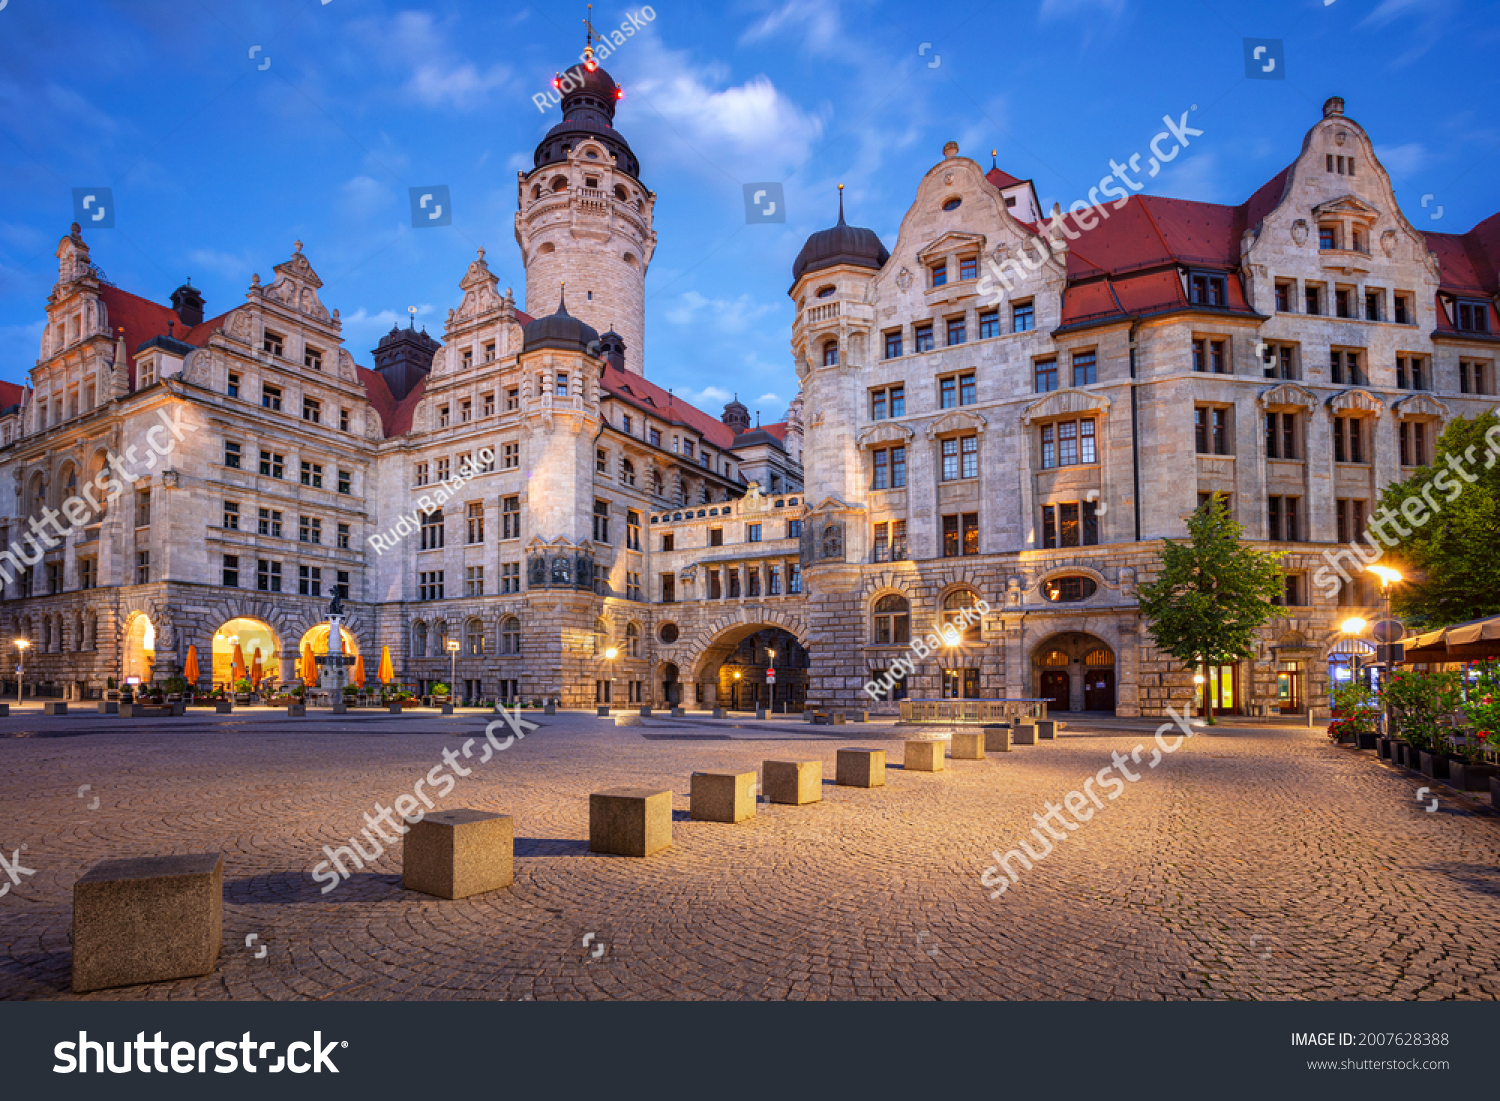 Leipzig, Germany. Cityscape image of Leipzig, Germany with New Town Hall at twilight blue hour. #2007628388